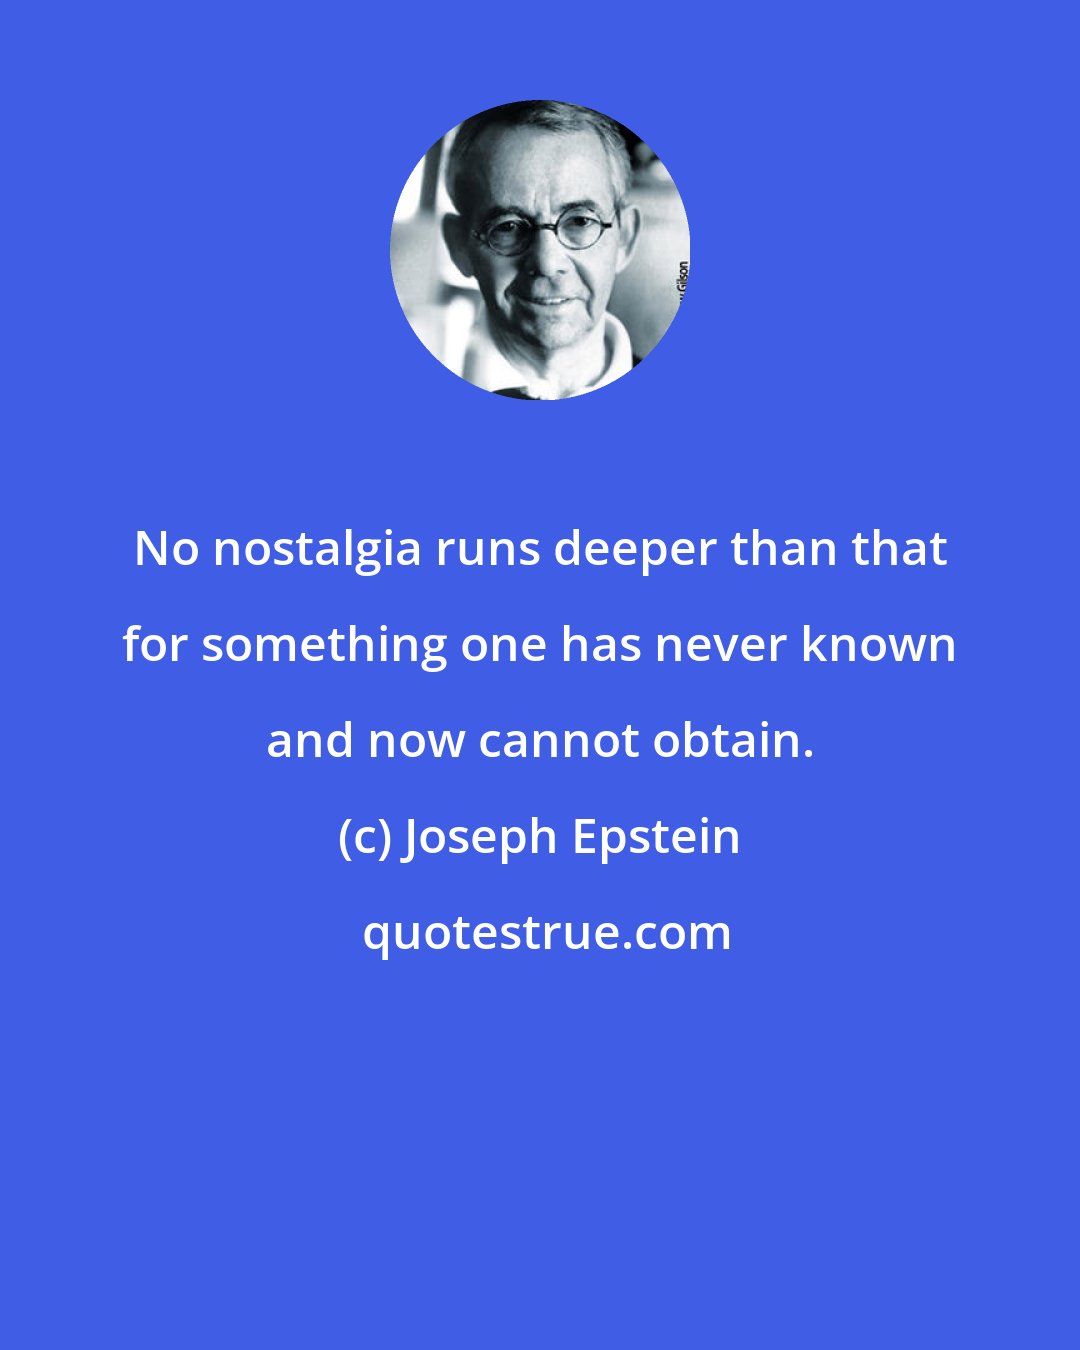 Joseph Epstein: No nostalgia runs deeper than that for something one has never known and now cannot obtain.